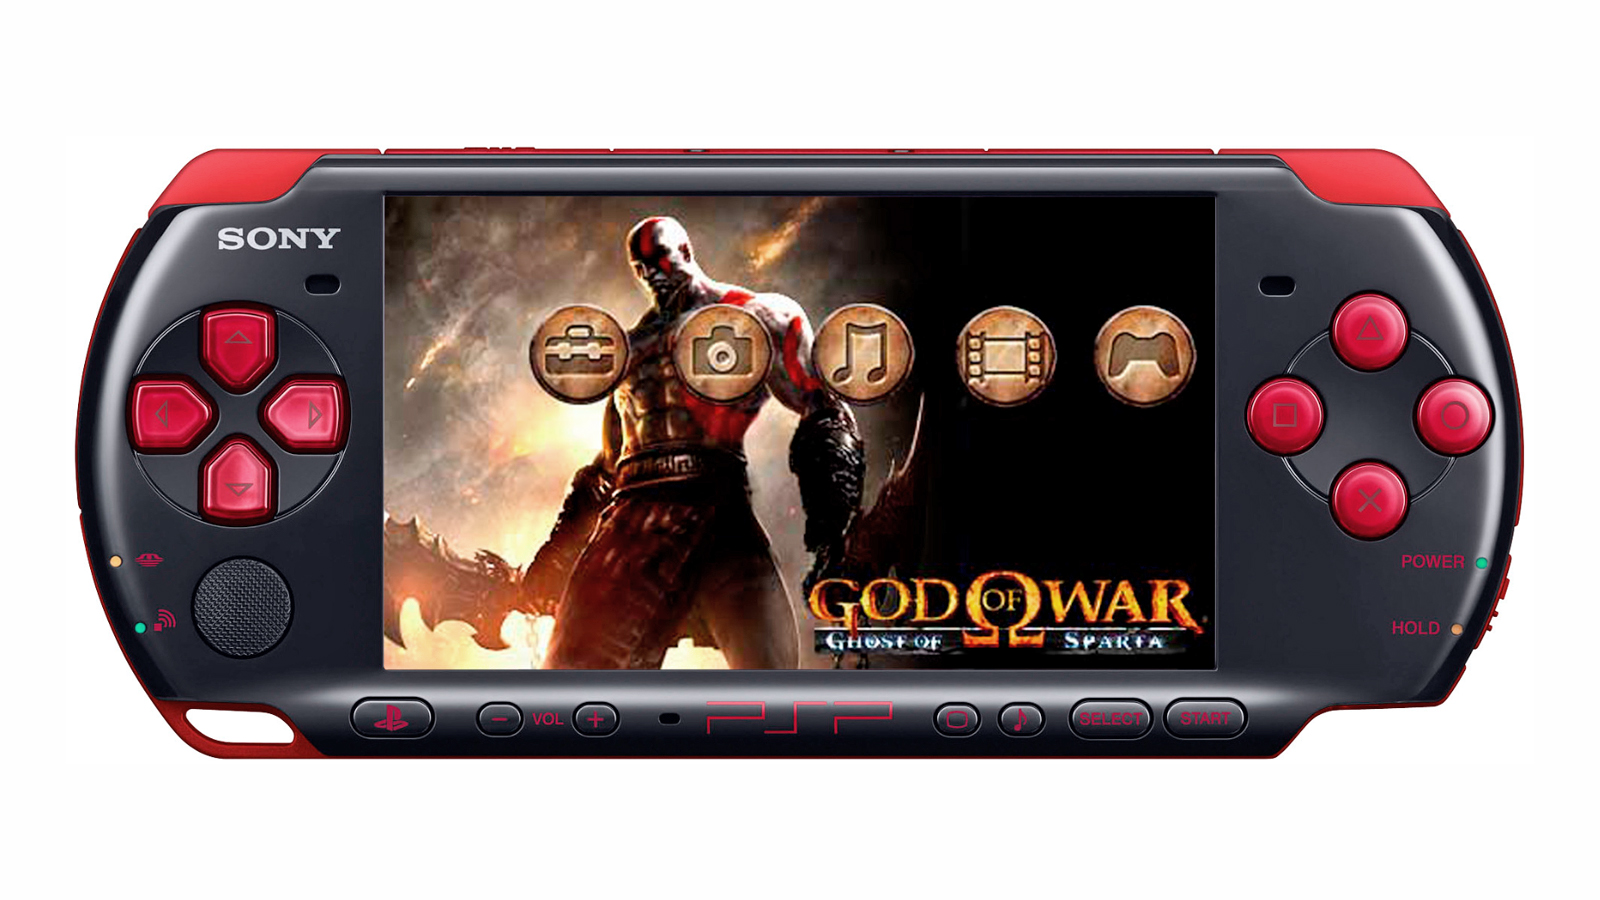 God of War: Chains of Olympus (Sony Playstation Portable